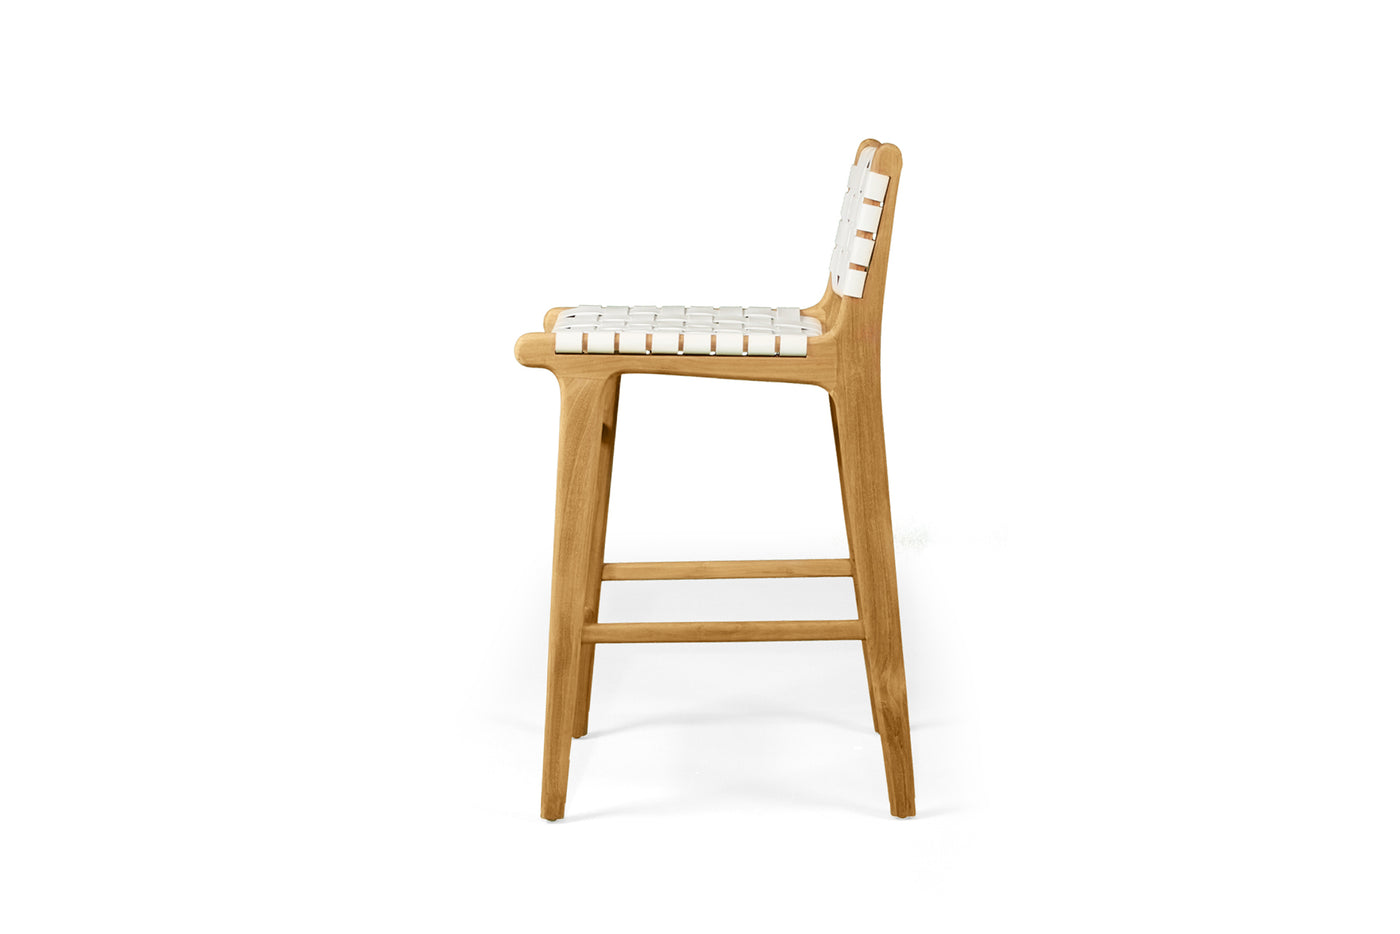 Cashmerie Leather Counter Stool - White - Woven